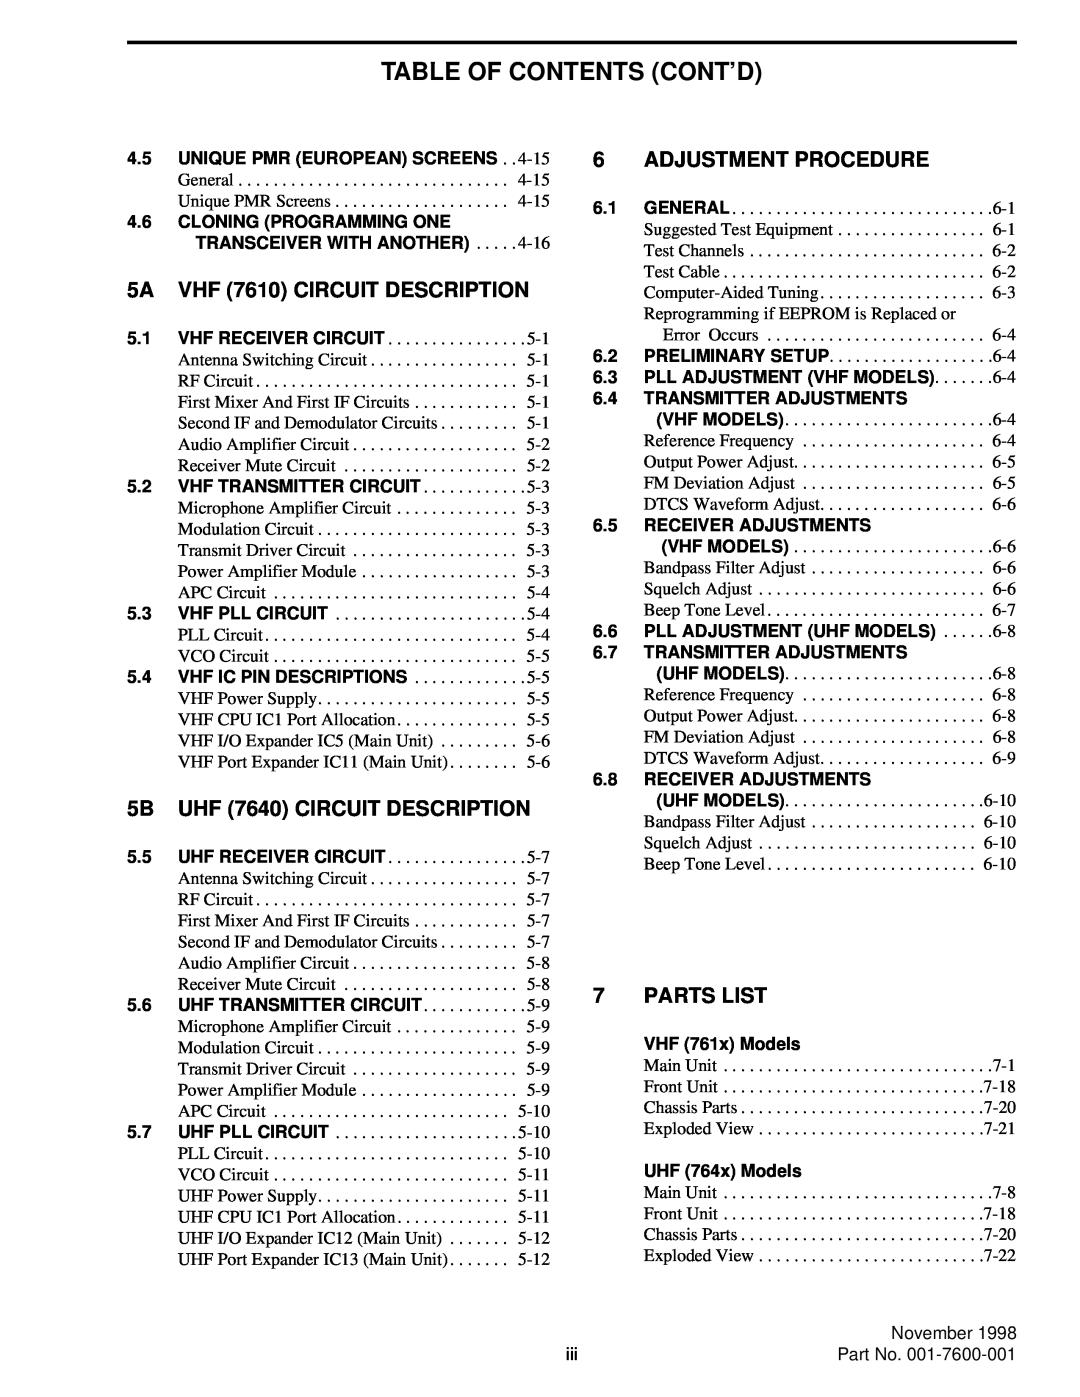 EFJohnson 764X Table Of Contents Cont’D, 5A VHF 7610 CIRCUIT DESCRIPTION, 5B UHF 7640 CIRCUIT DESCRIPTION, Parts List 